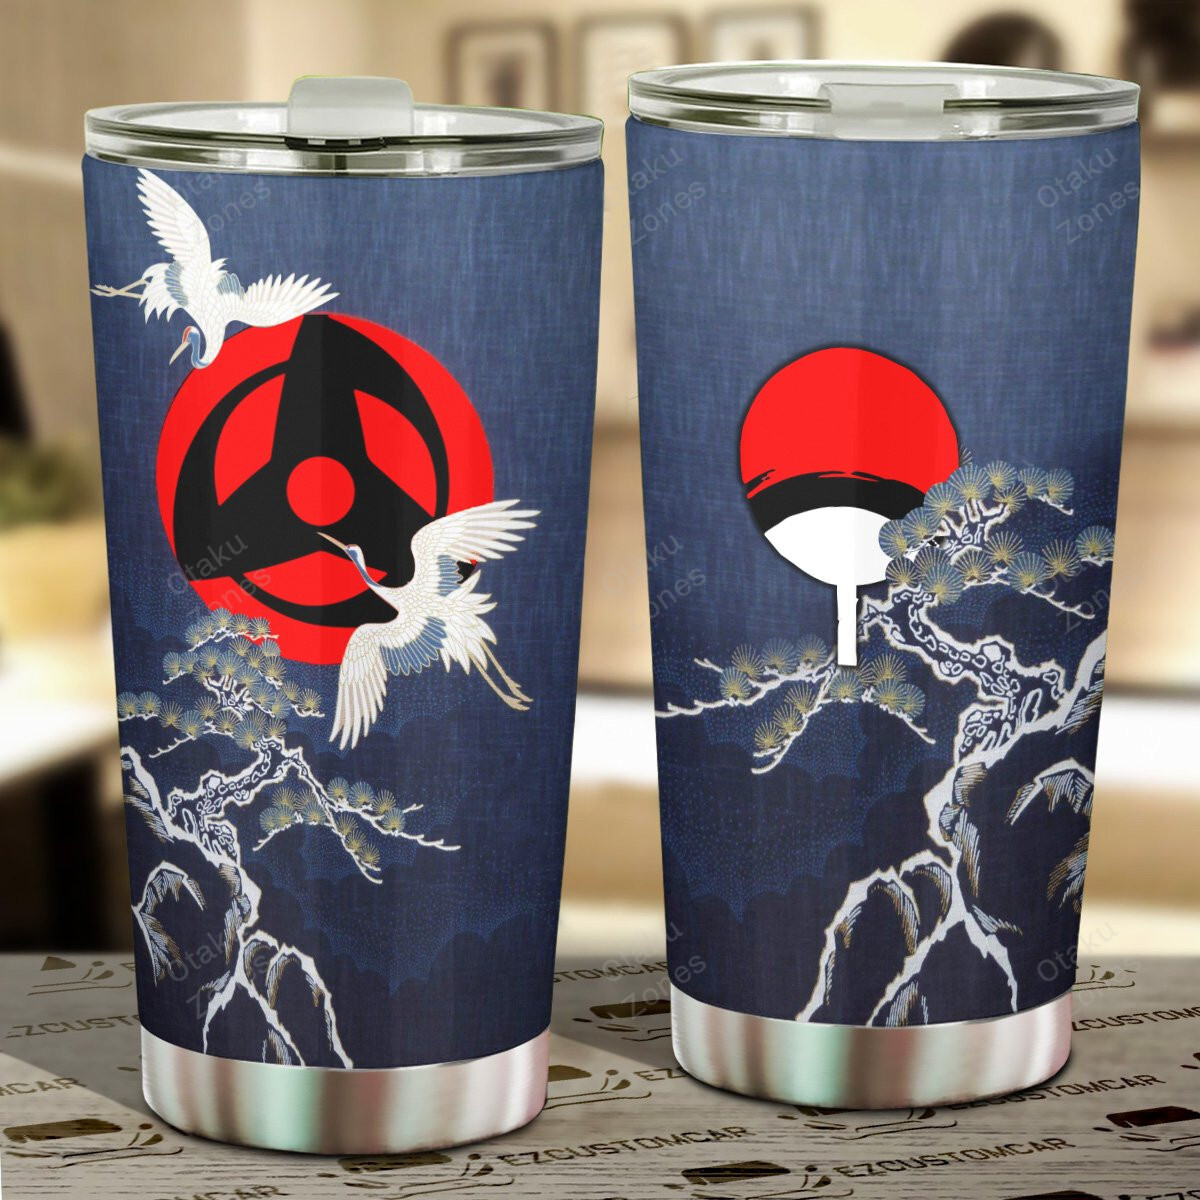 Go ahead and order your new tumbler now! 82